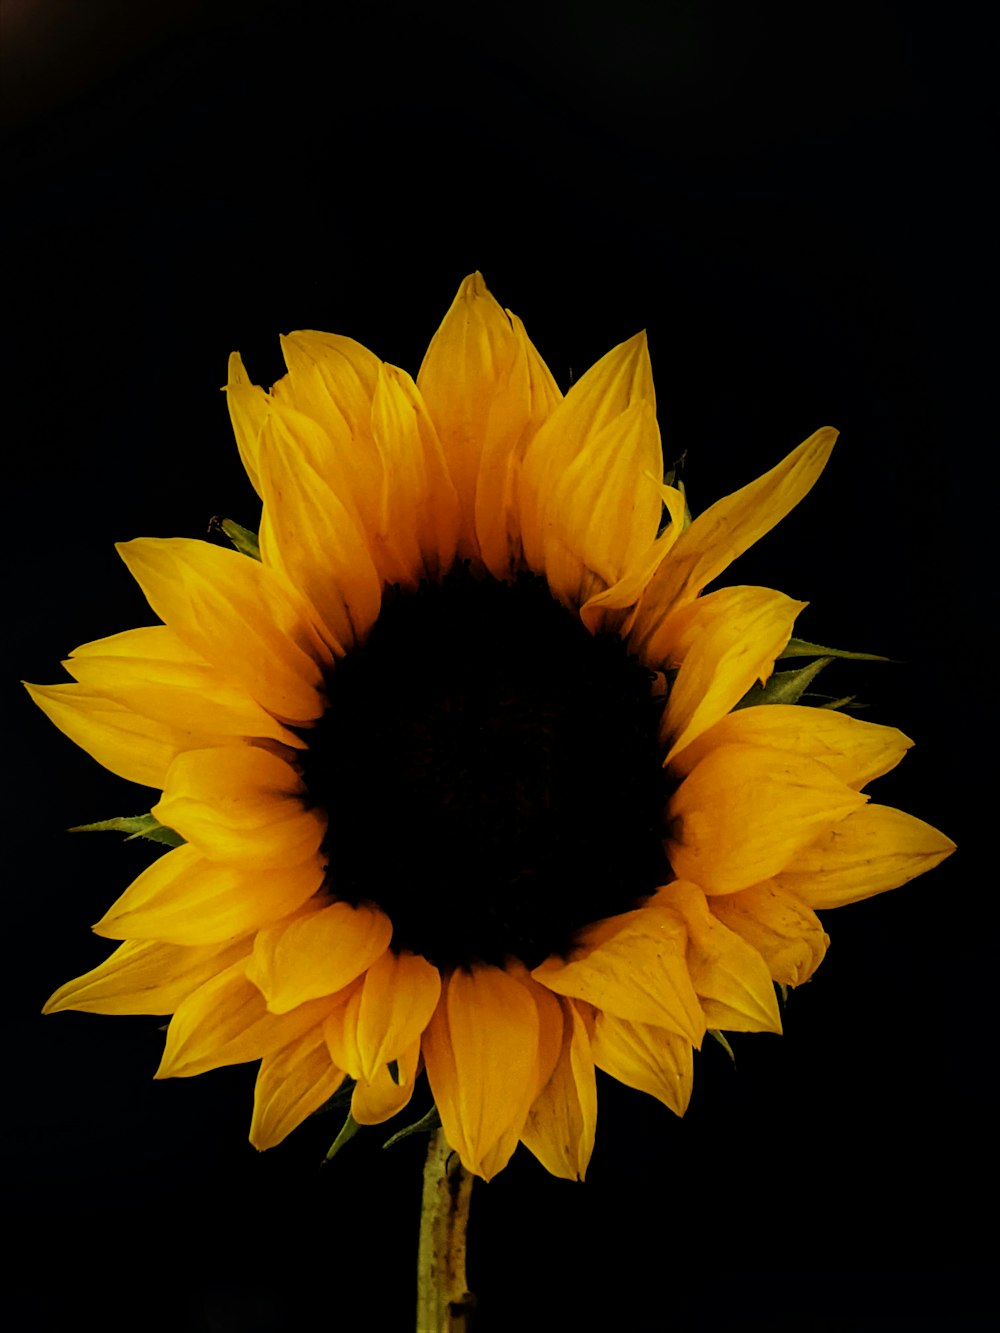 a large yellow sunflower with a black background